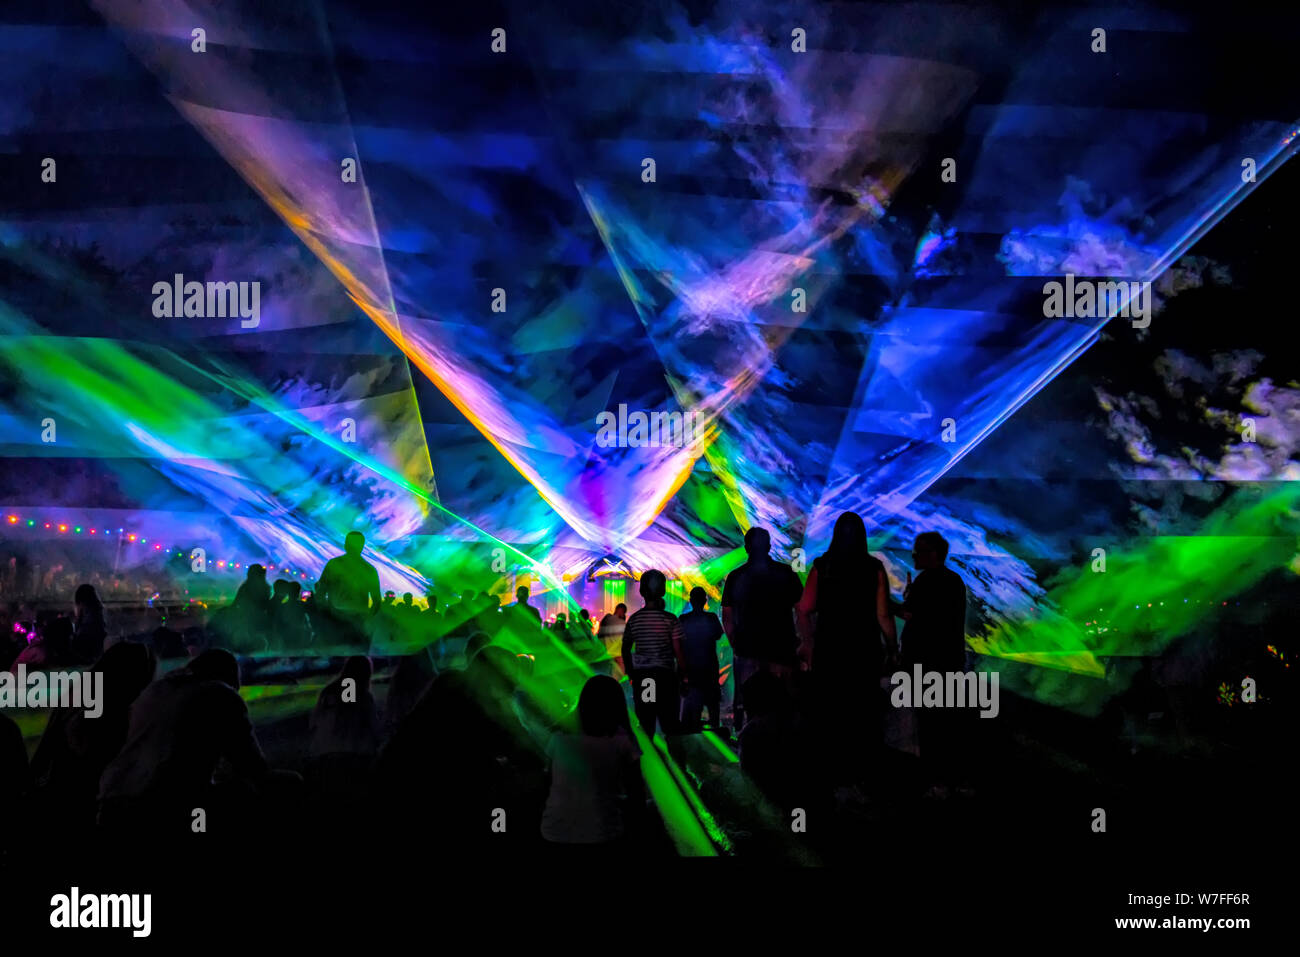 Laubach, Germany, 08/03/2019: Laser show, Luxury entertainment with audience silhouettes in nightclub event, festival or New Year Stock Photo